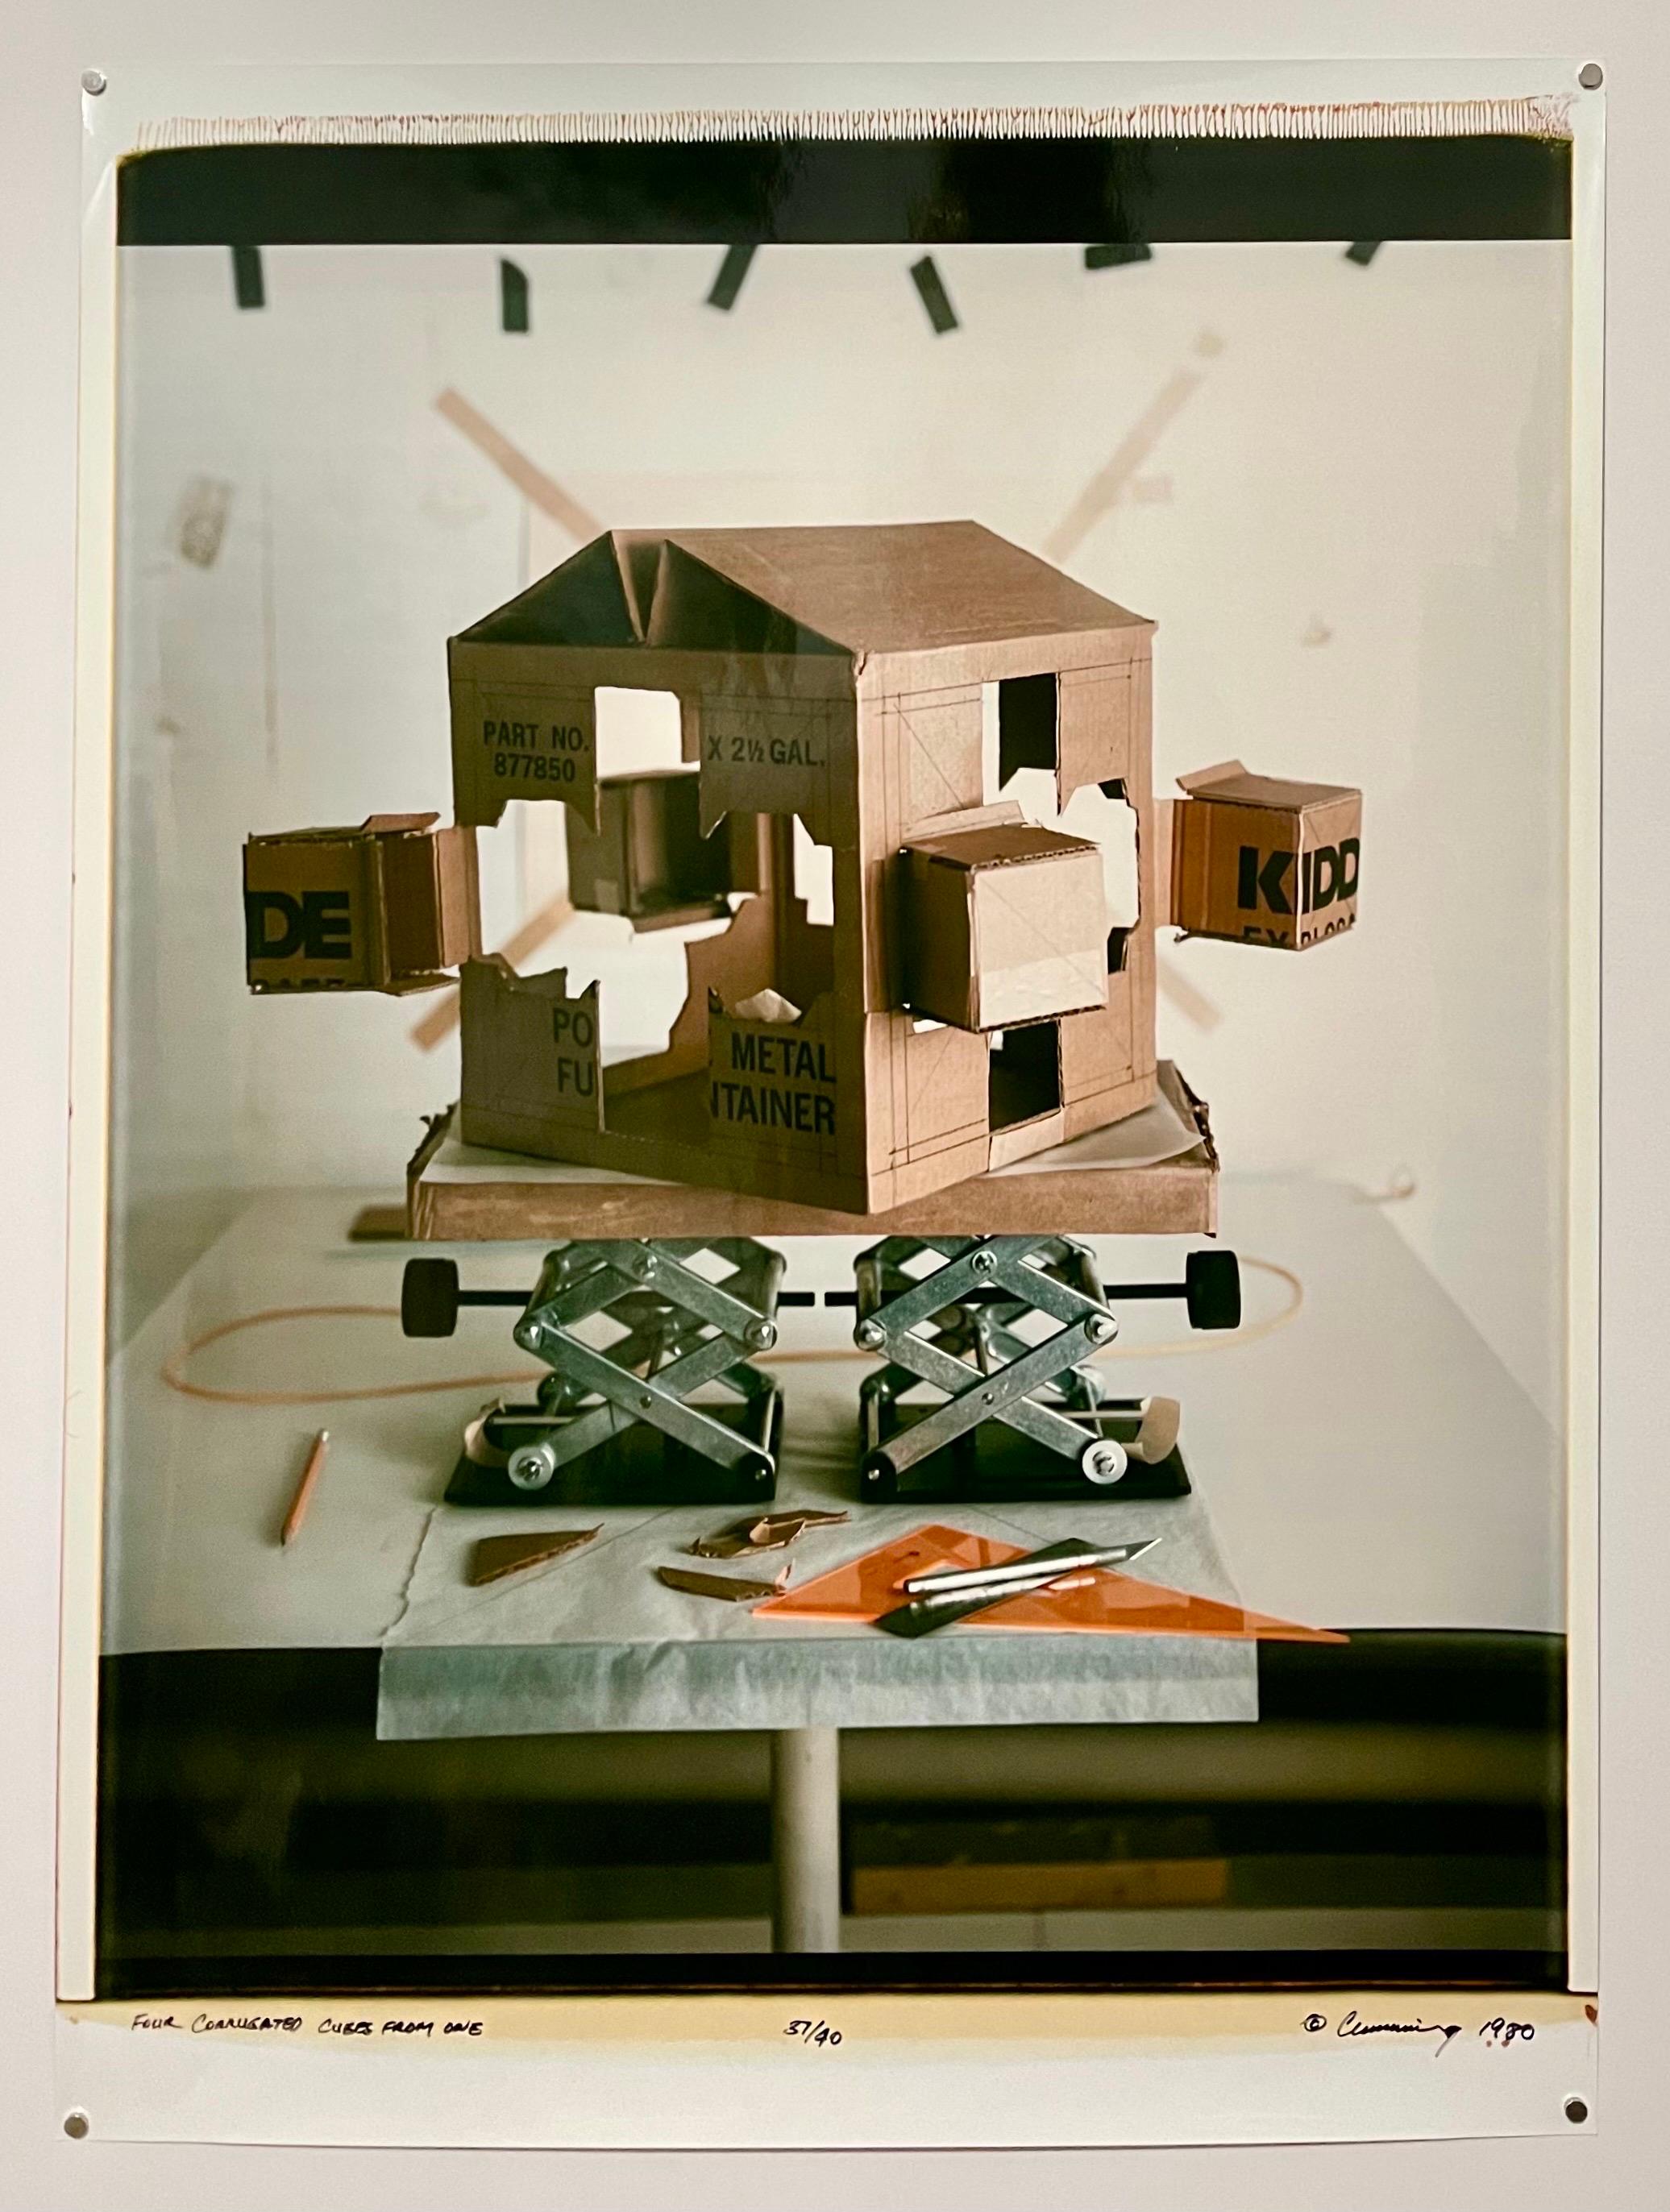 
Robert Cumming
Title: Four Corrugated Cubes from One
Date: 1980
Original Polaroid Large Format Print (Photo-Internal dye diffusion transfer)
Location:	Cambridge Massachusetts United States
Dimensions: Image: 27 1/2 x 20 1/2 in. (69.9 x 52.1 cm),